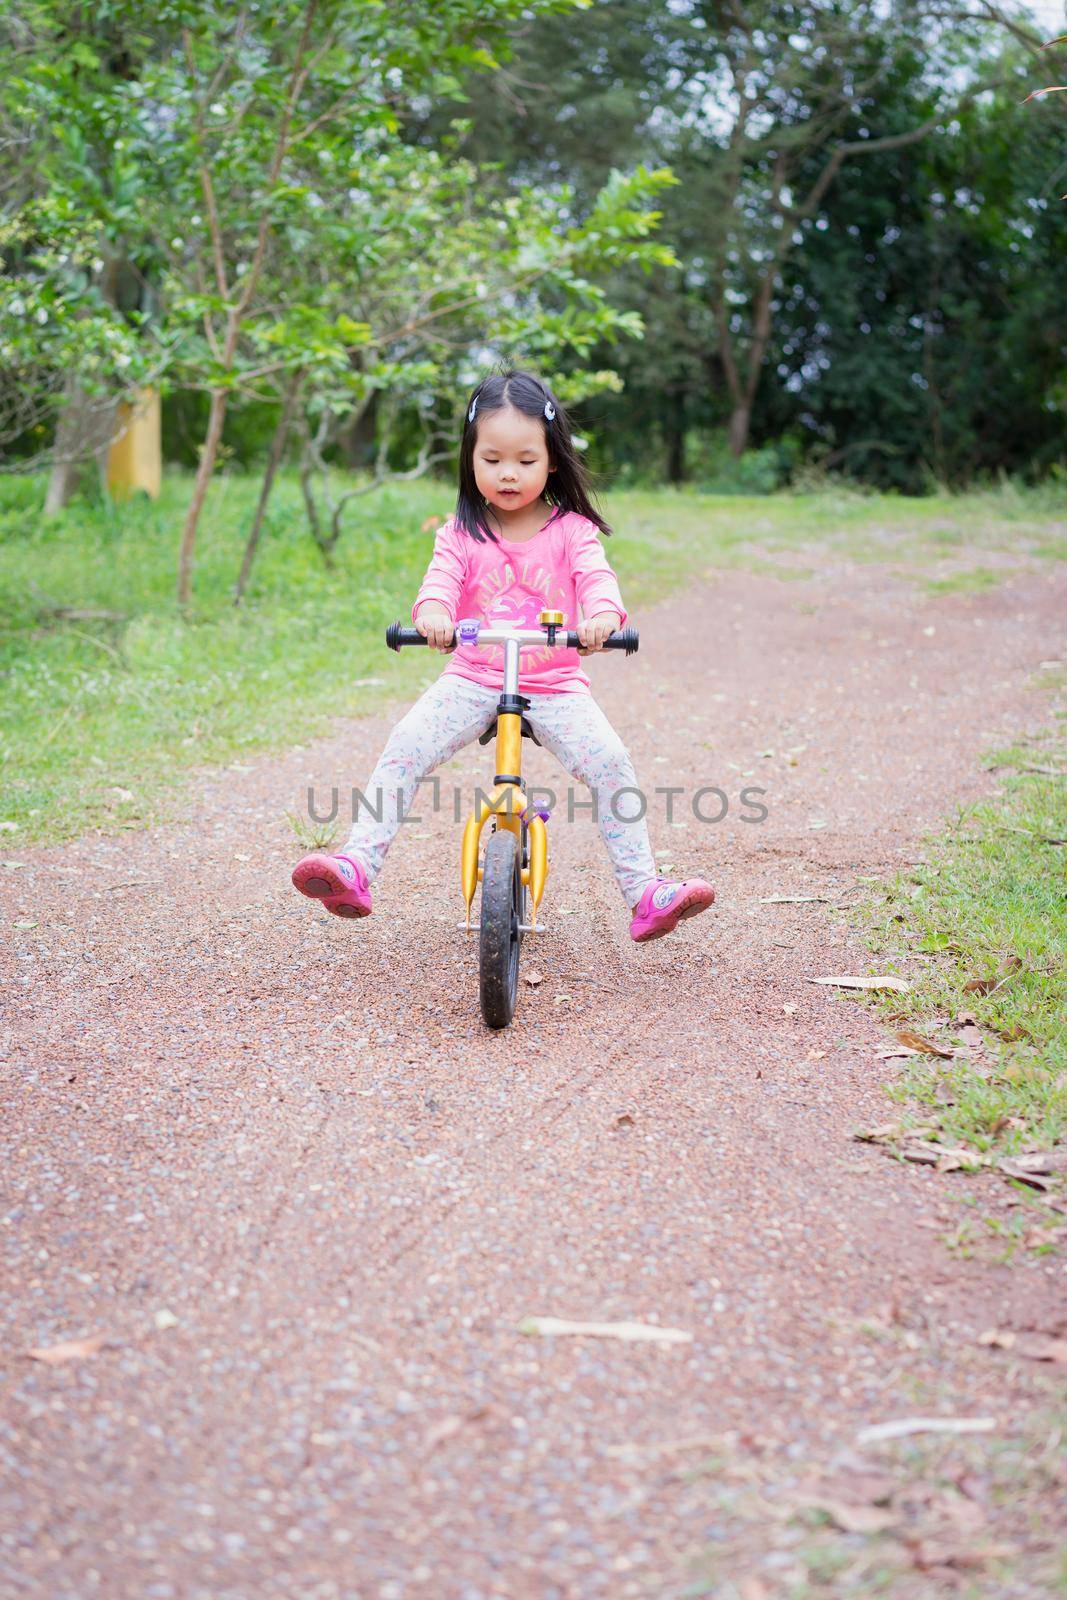 Little girl learns to riding balance bike on slope in the park by domonite